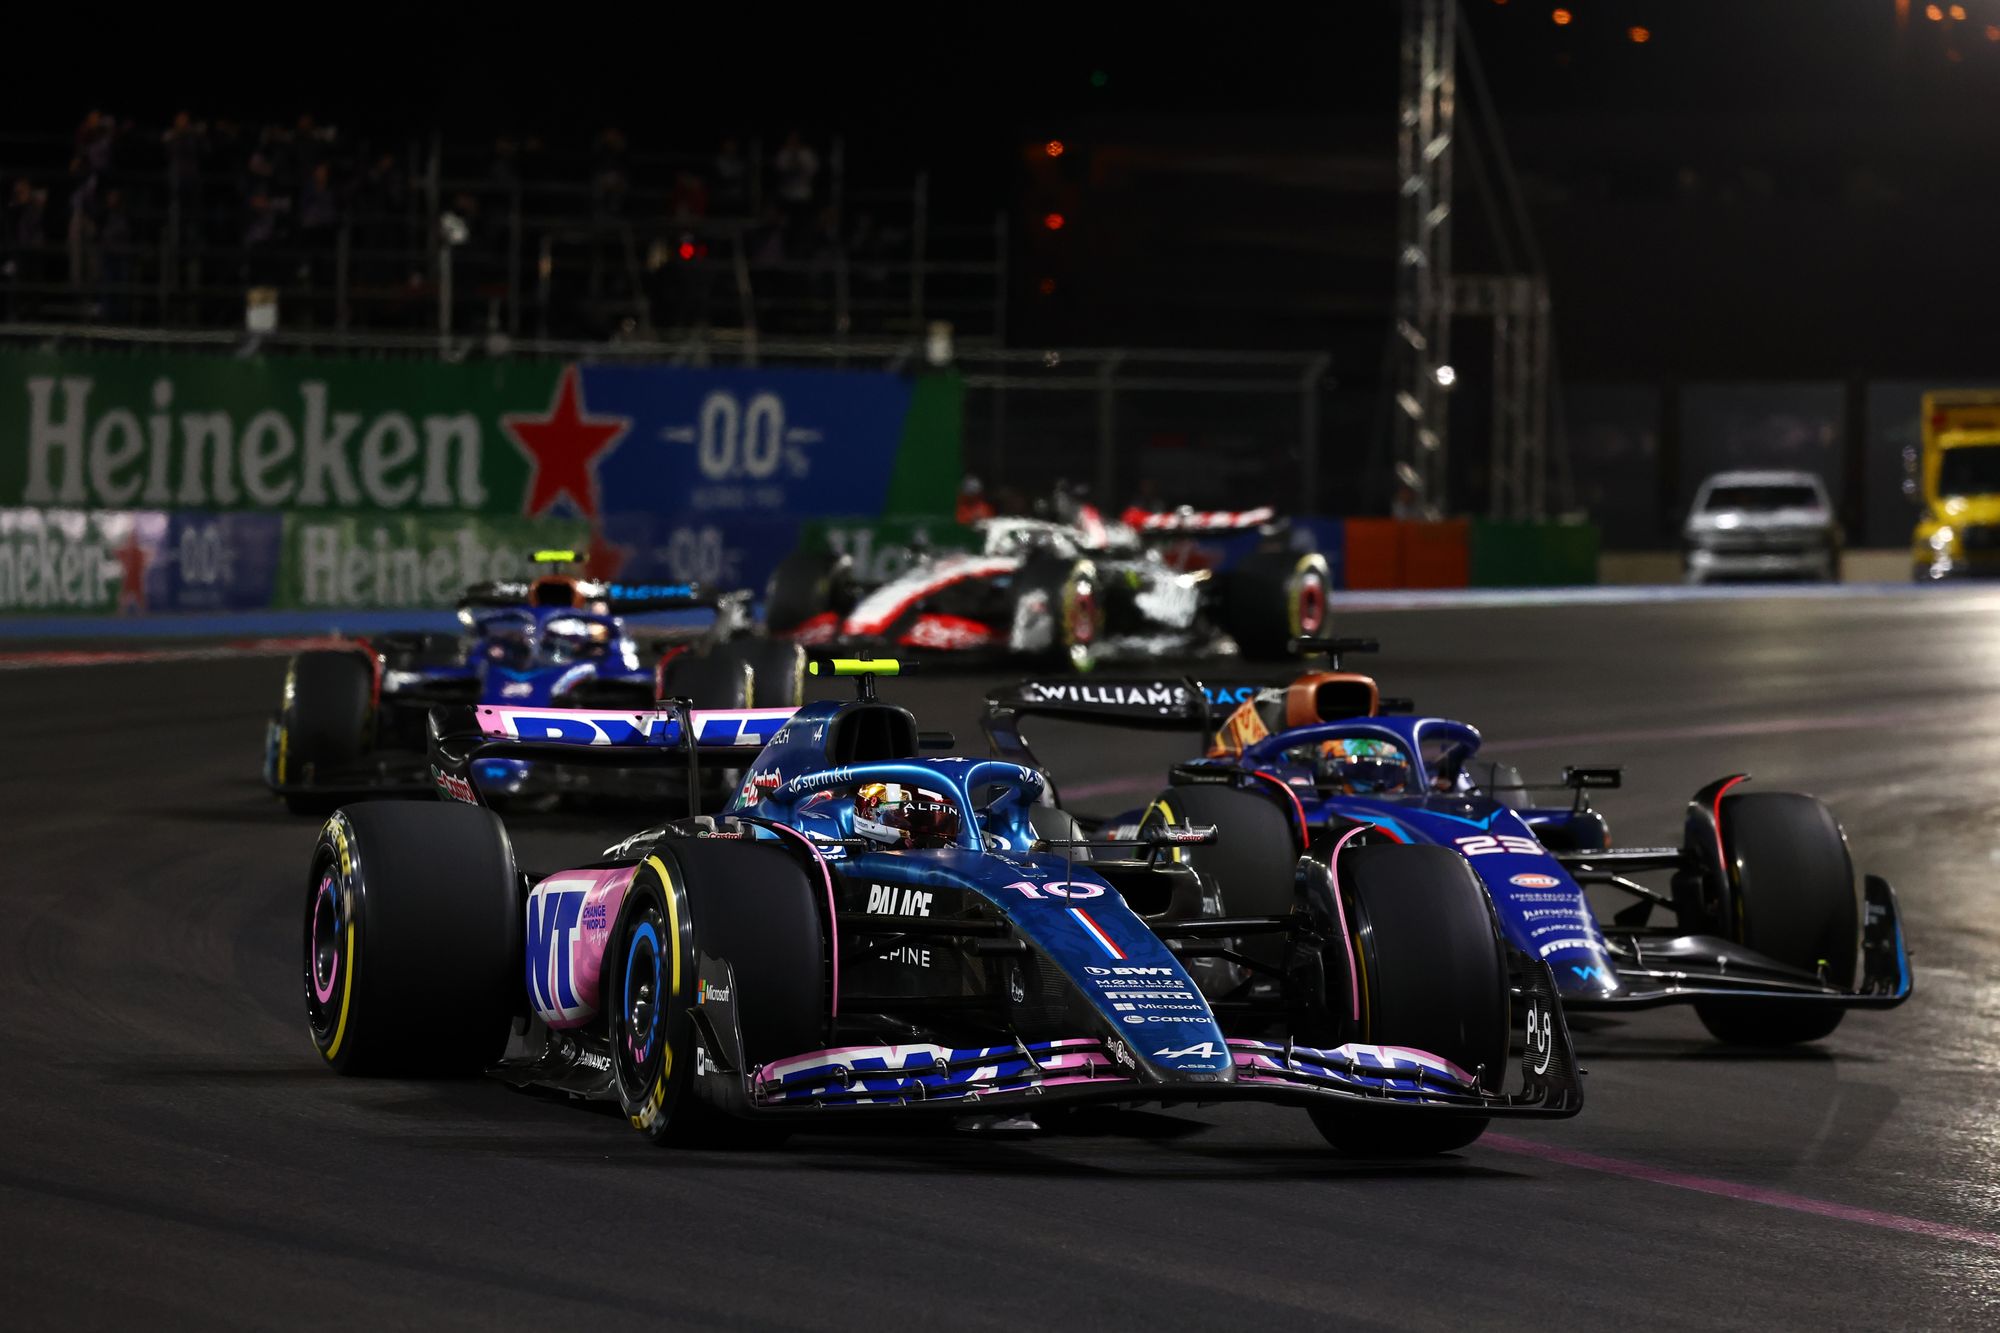 Winners and Losers from 2023 F1 Las Vegas Grand Prix qualifying